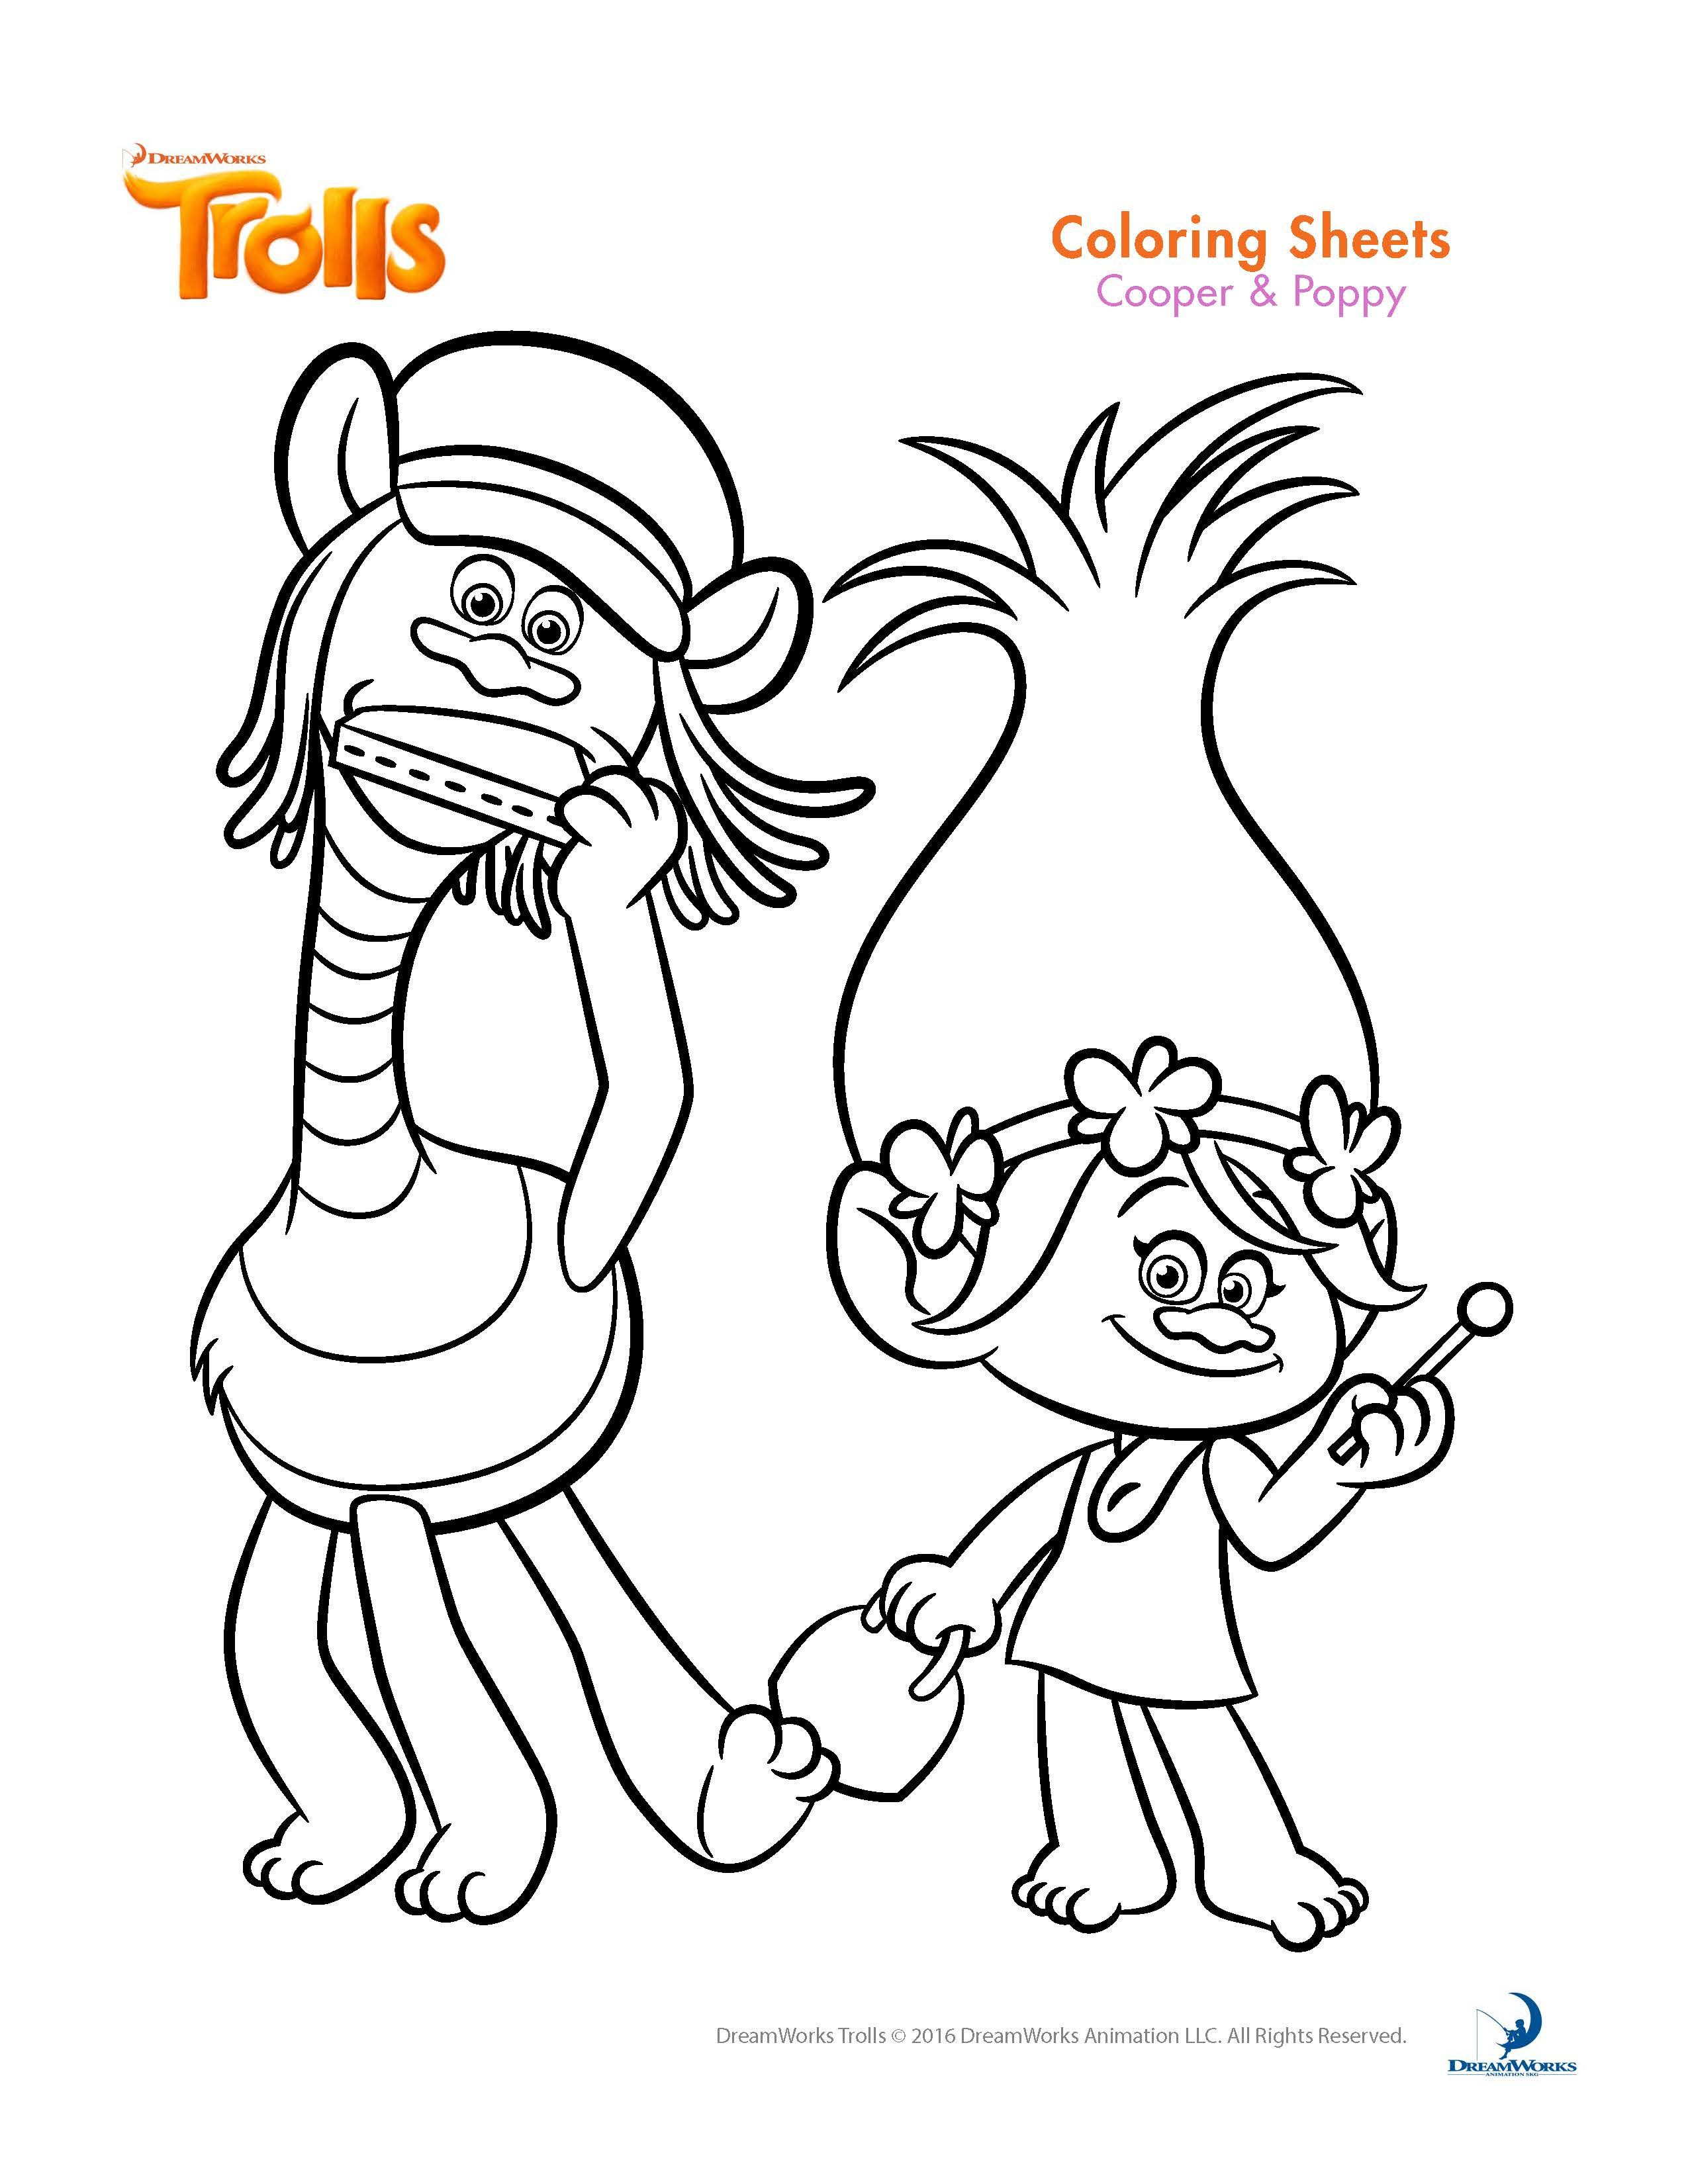 Trolls Coloring Pages And Printable Activity Sheets | Trolls B-Day - Free Printable Troll Coloring Pages